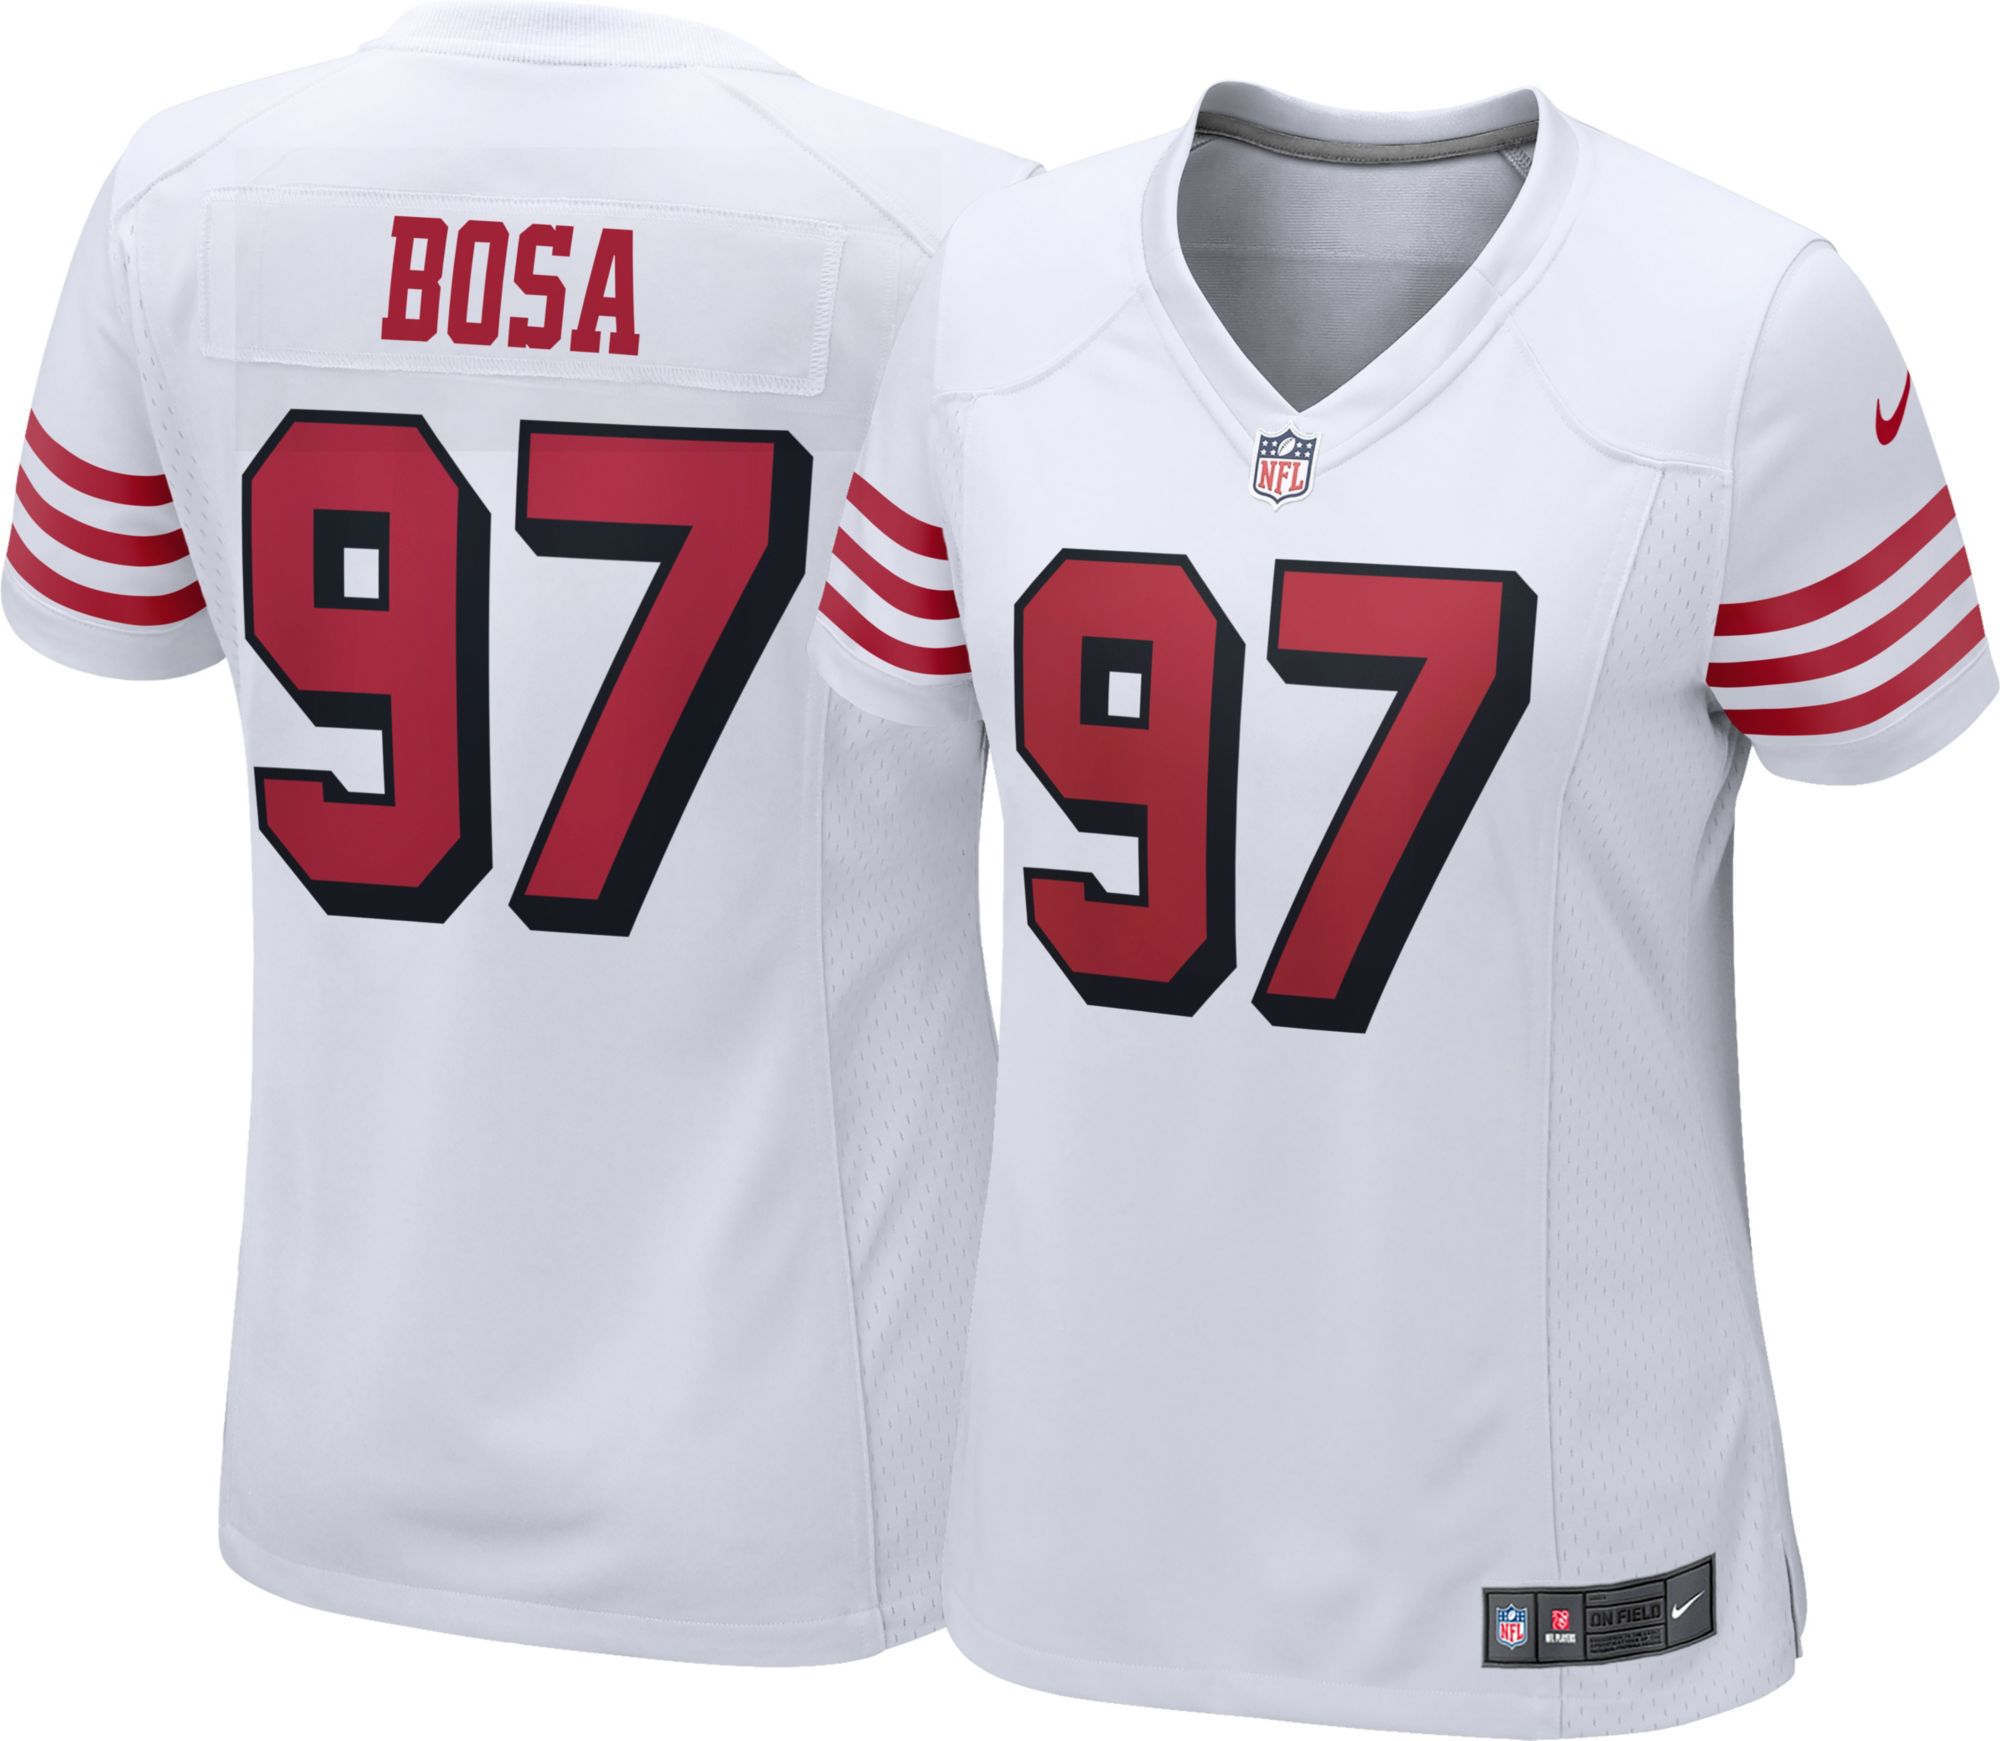 97 49ers jersey